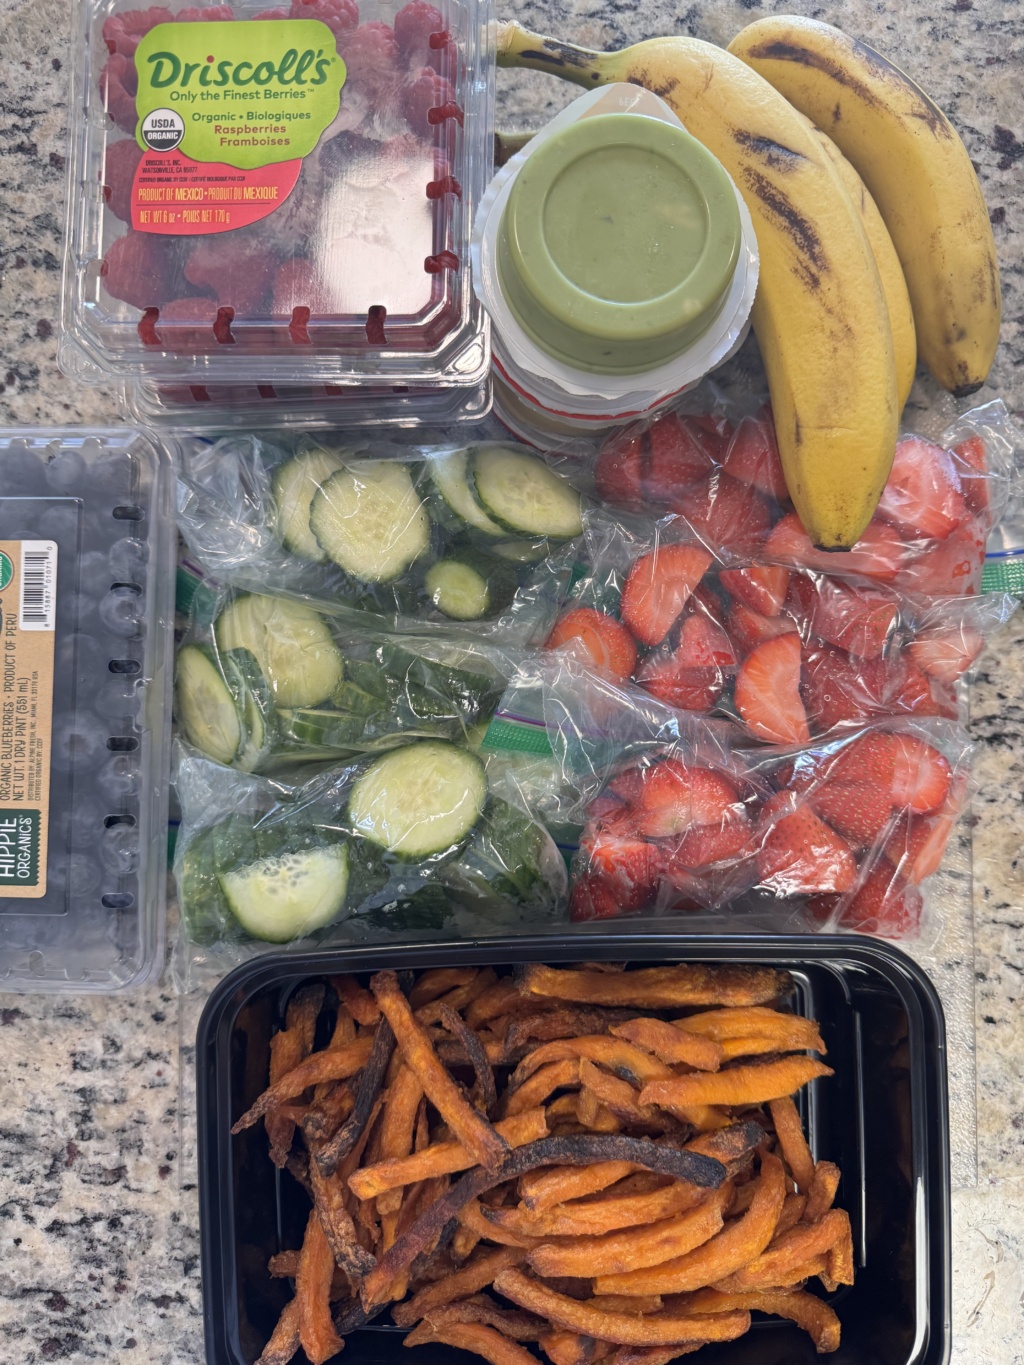 Meal prep veggies for traveling with kids.